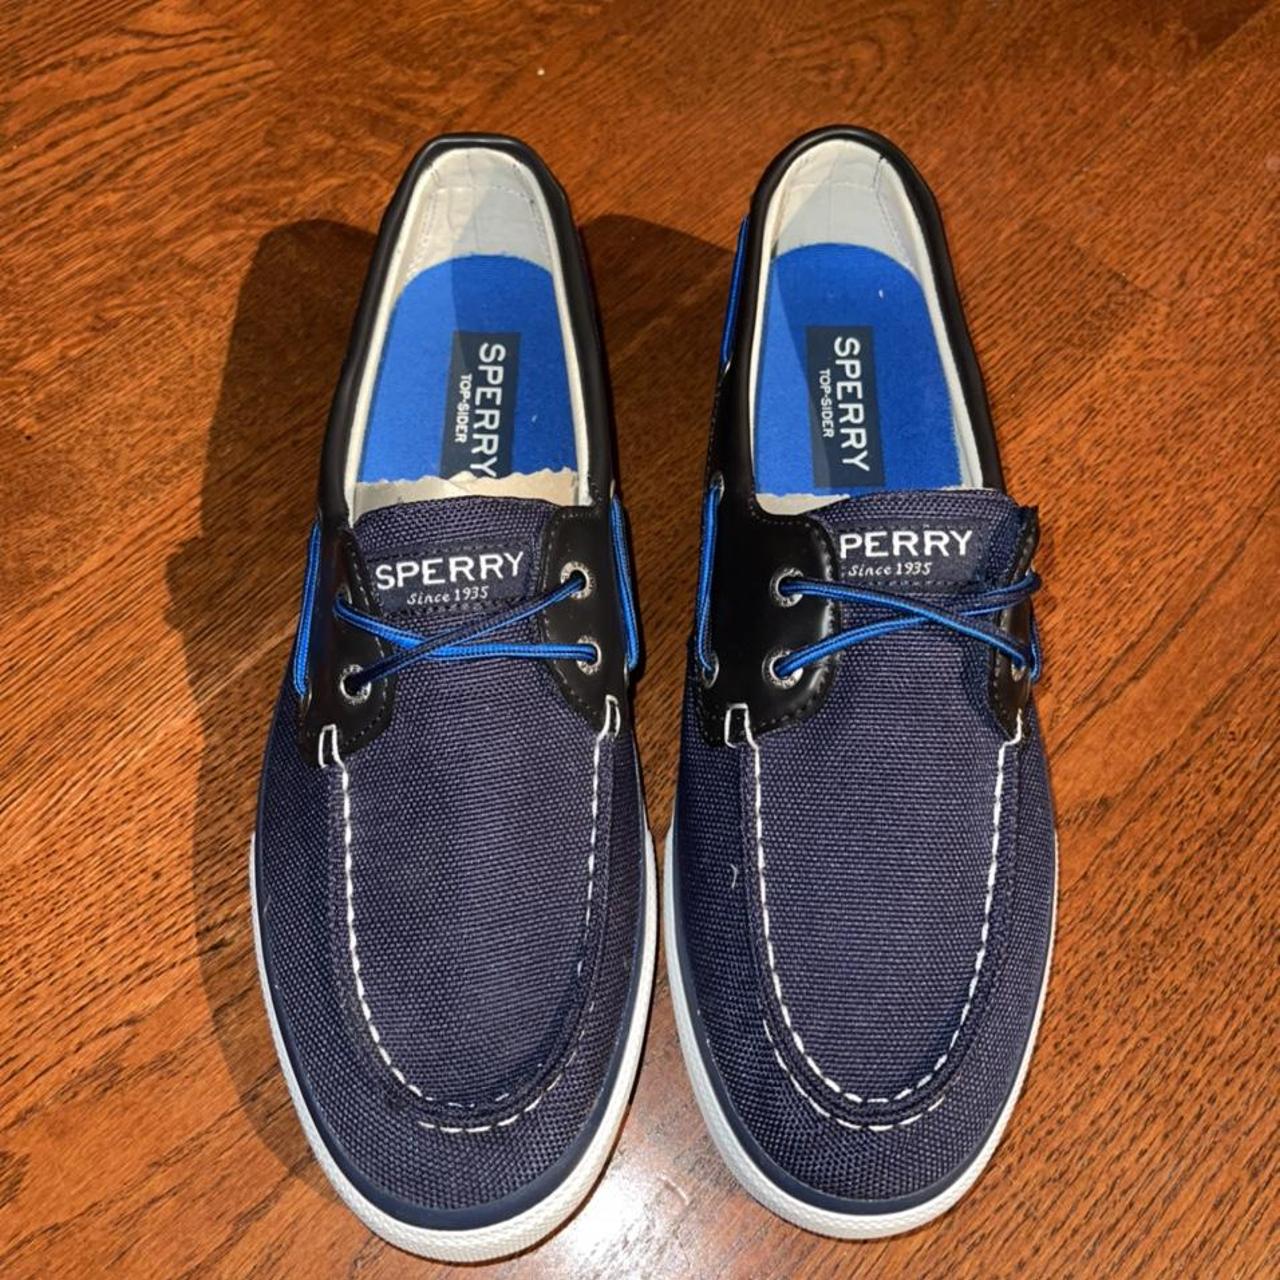 Sperry Men's White and Navy | Depop